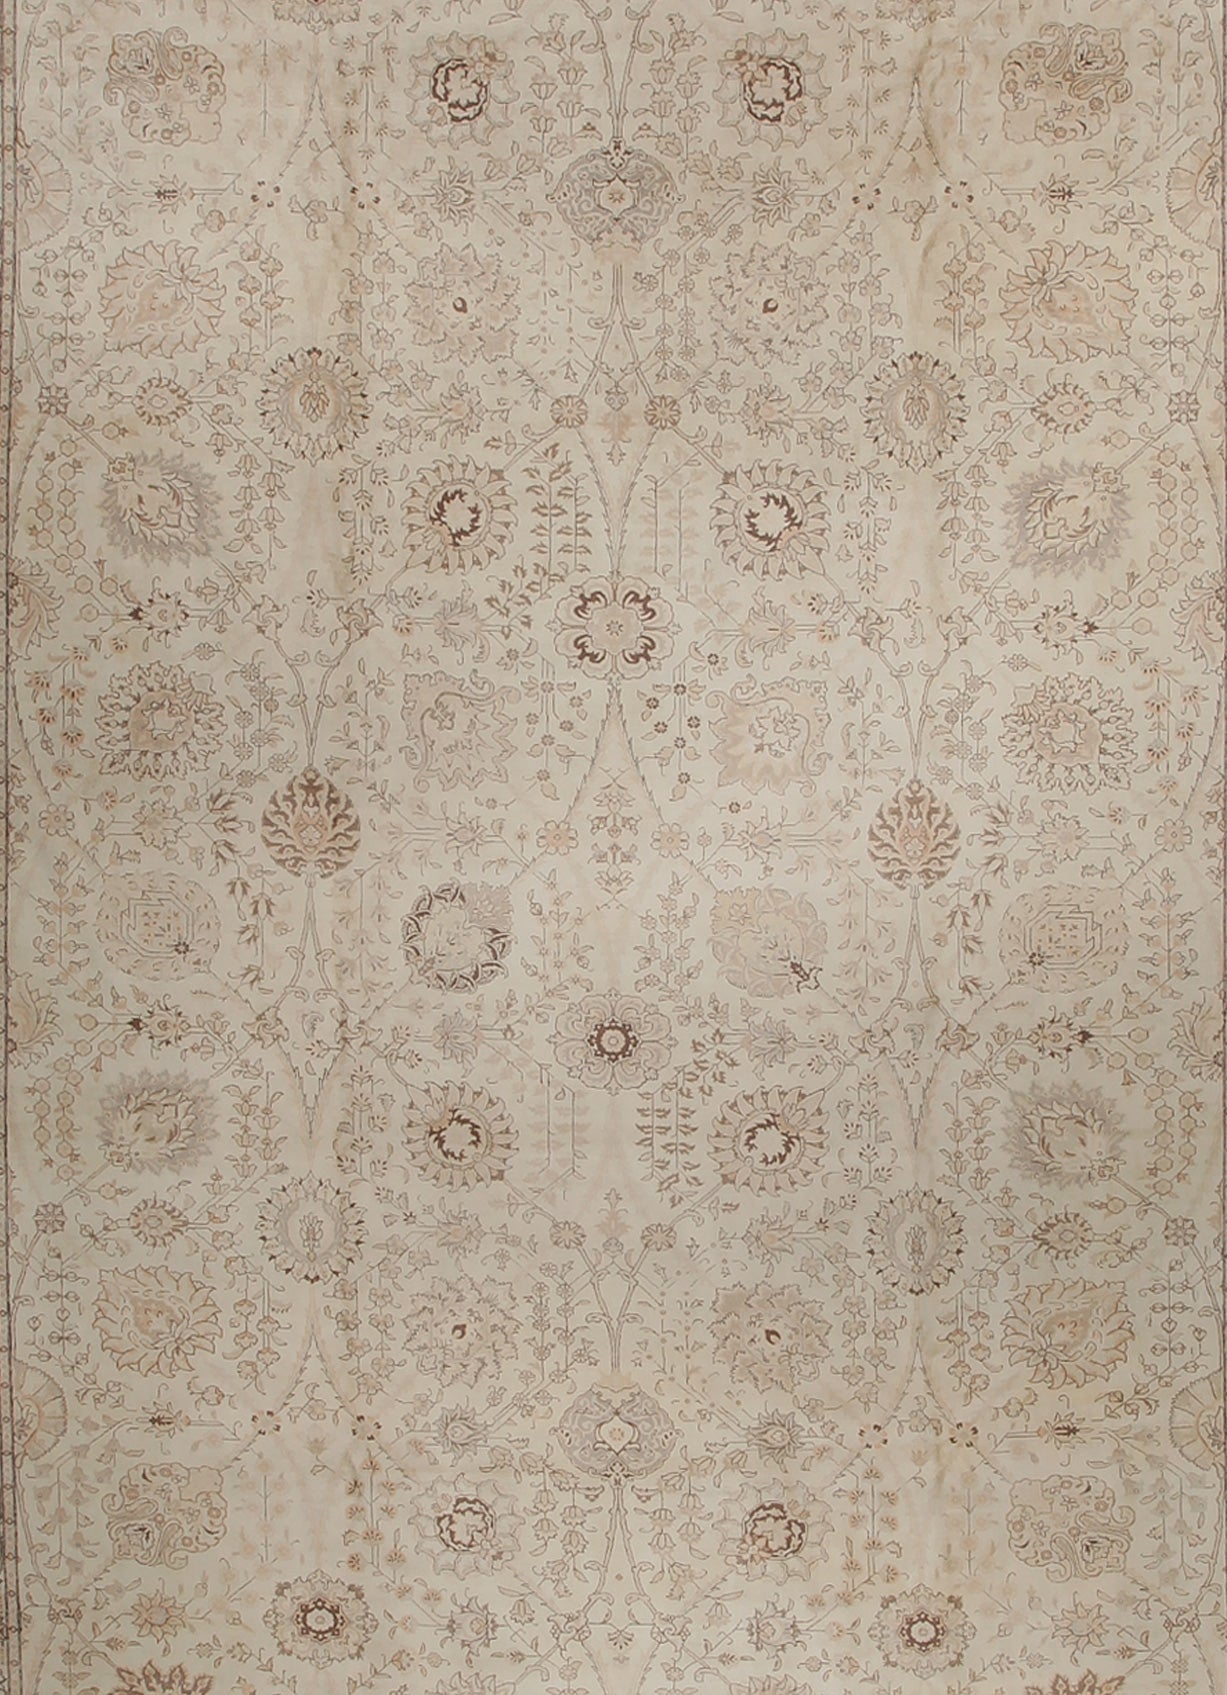 the centered and symmetric pattern is outlined in brown.